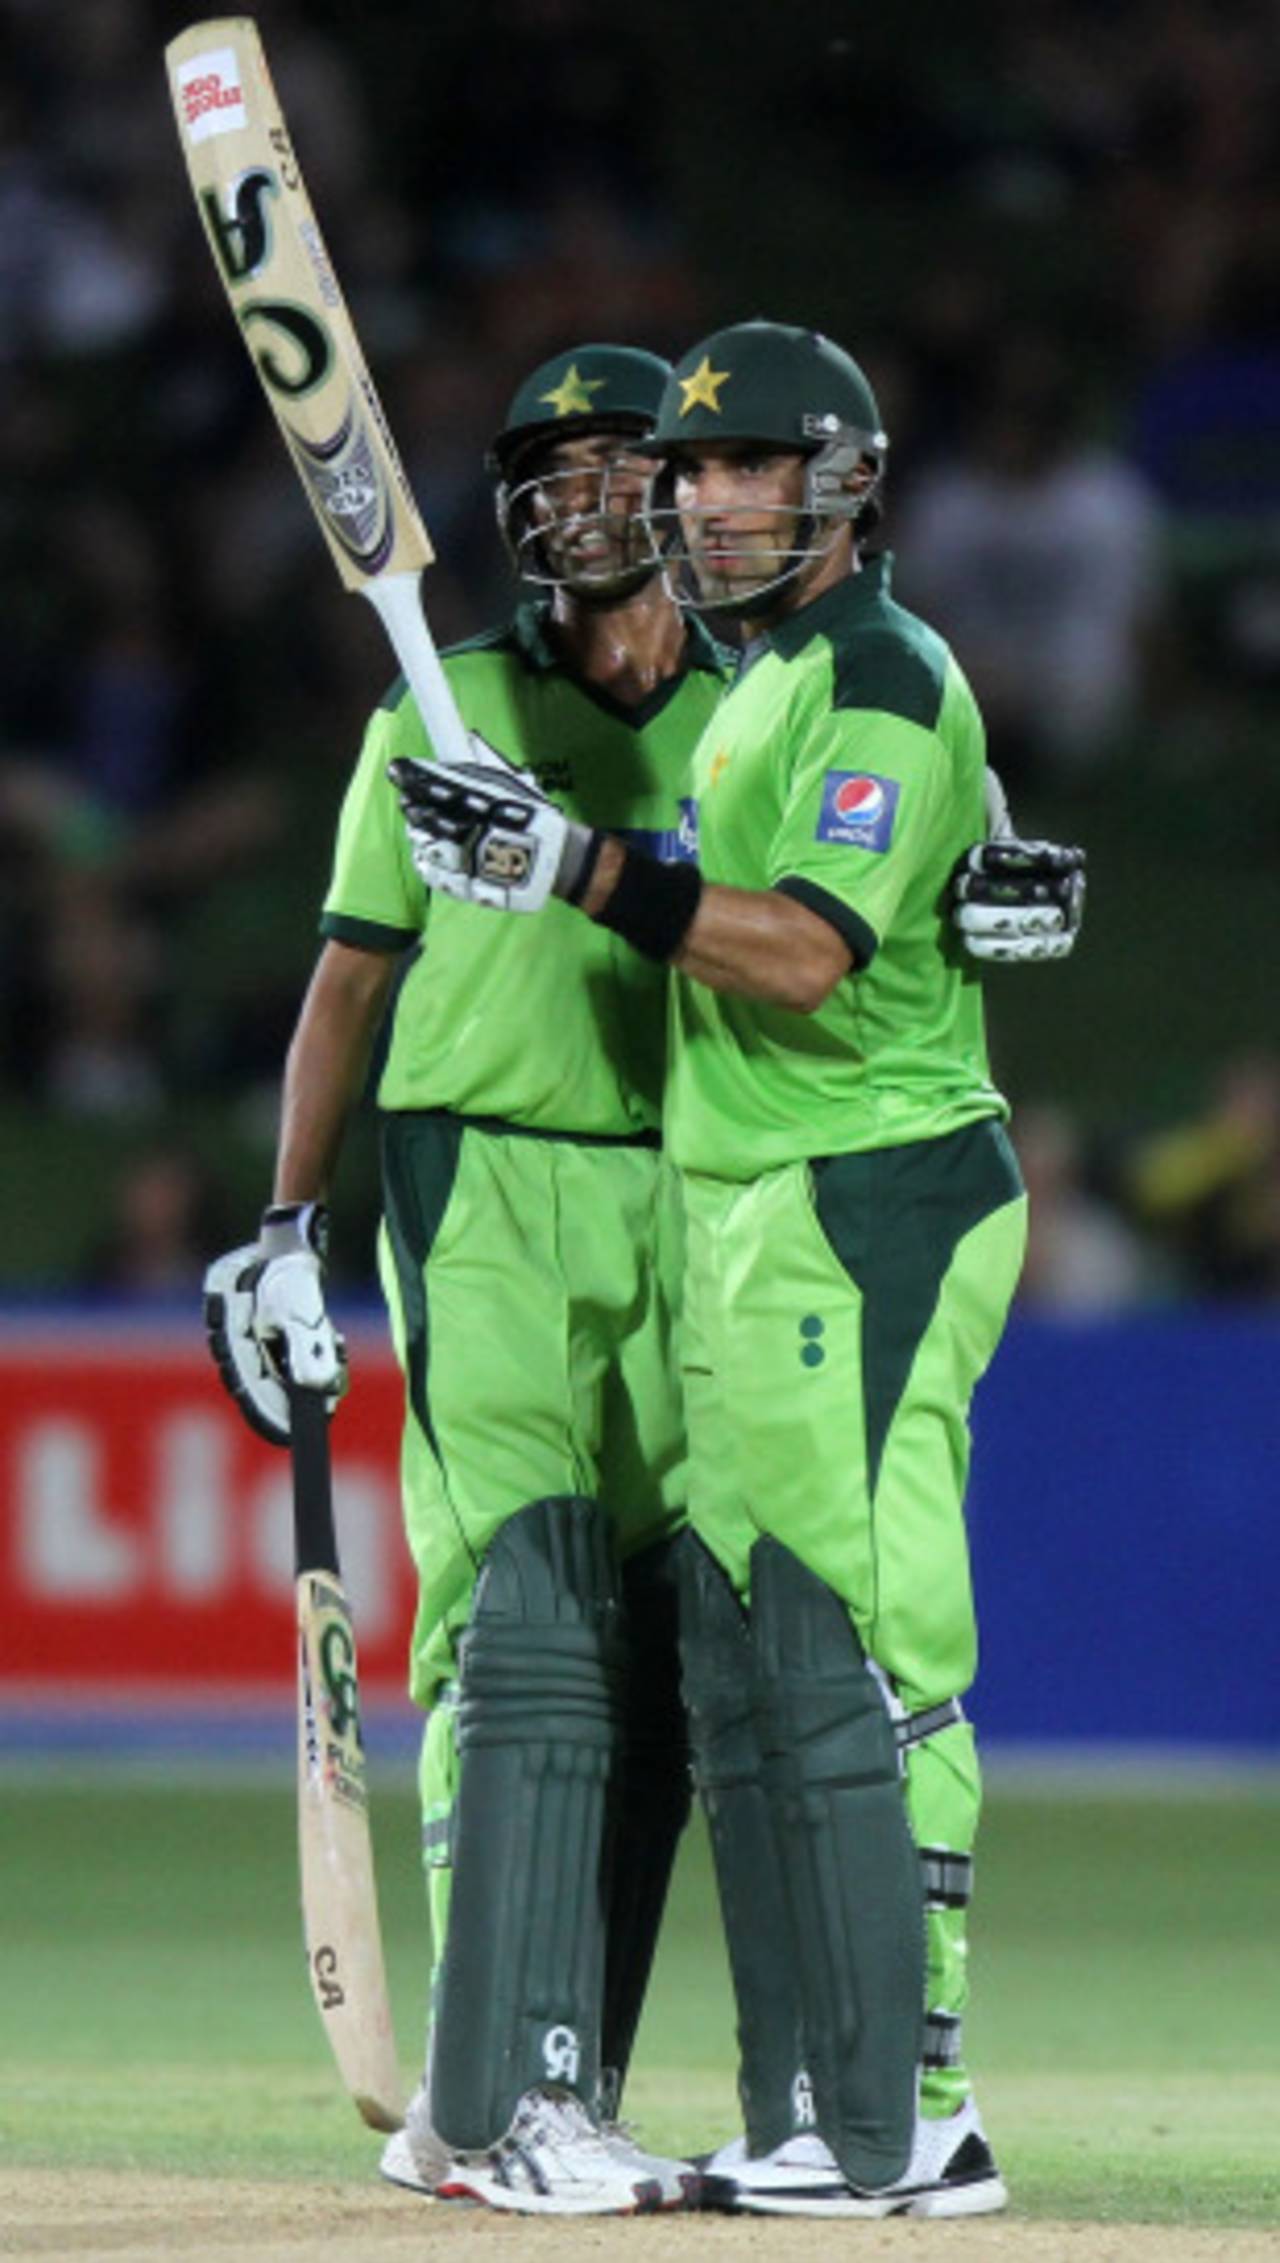 Misbah-ul-Haq is congratulated by Younis Khan on reaching his half-century, New Zealand v Pakistan, 4th ODI, Napier, February 1, 2011